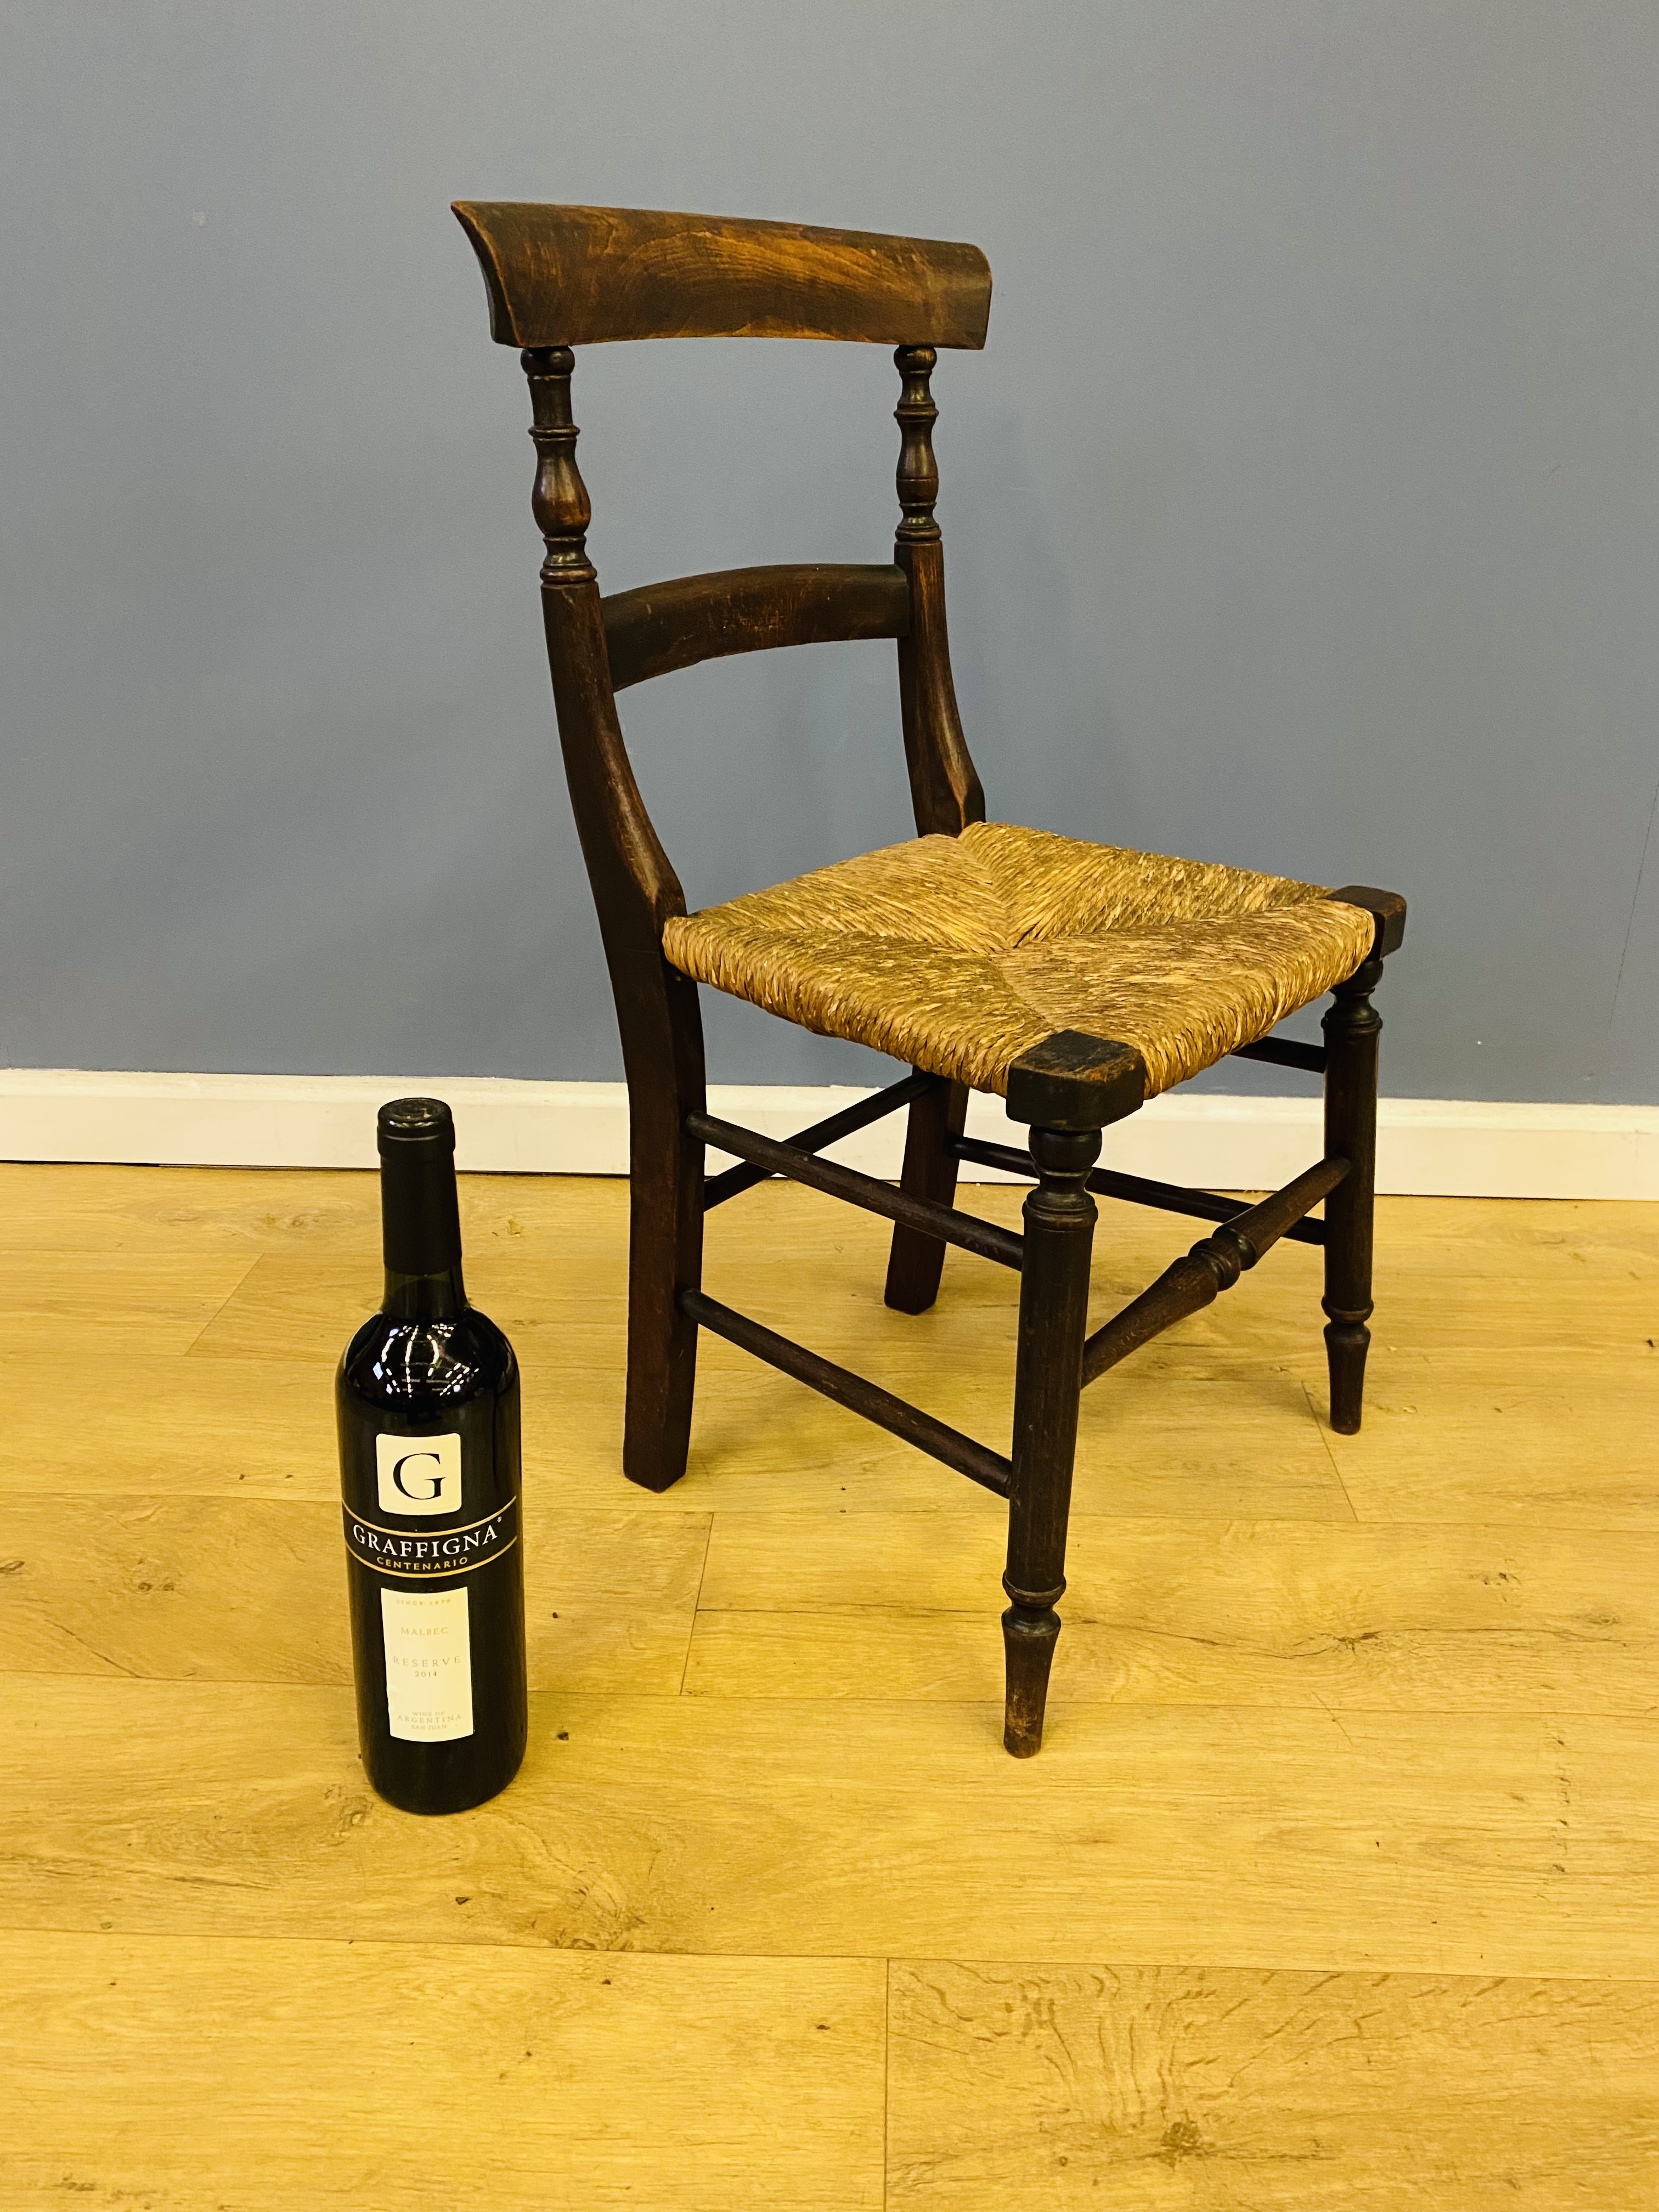 19th century beech childs chair - Image 4 of 5